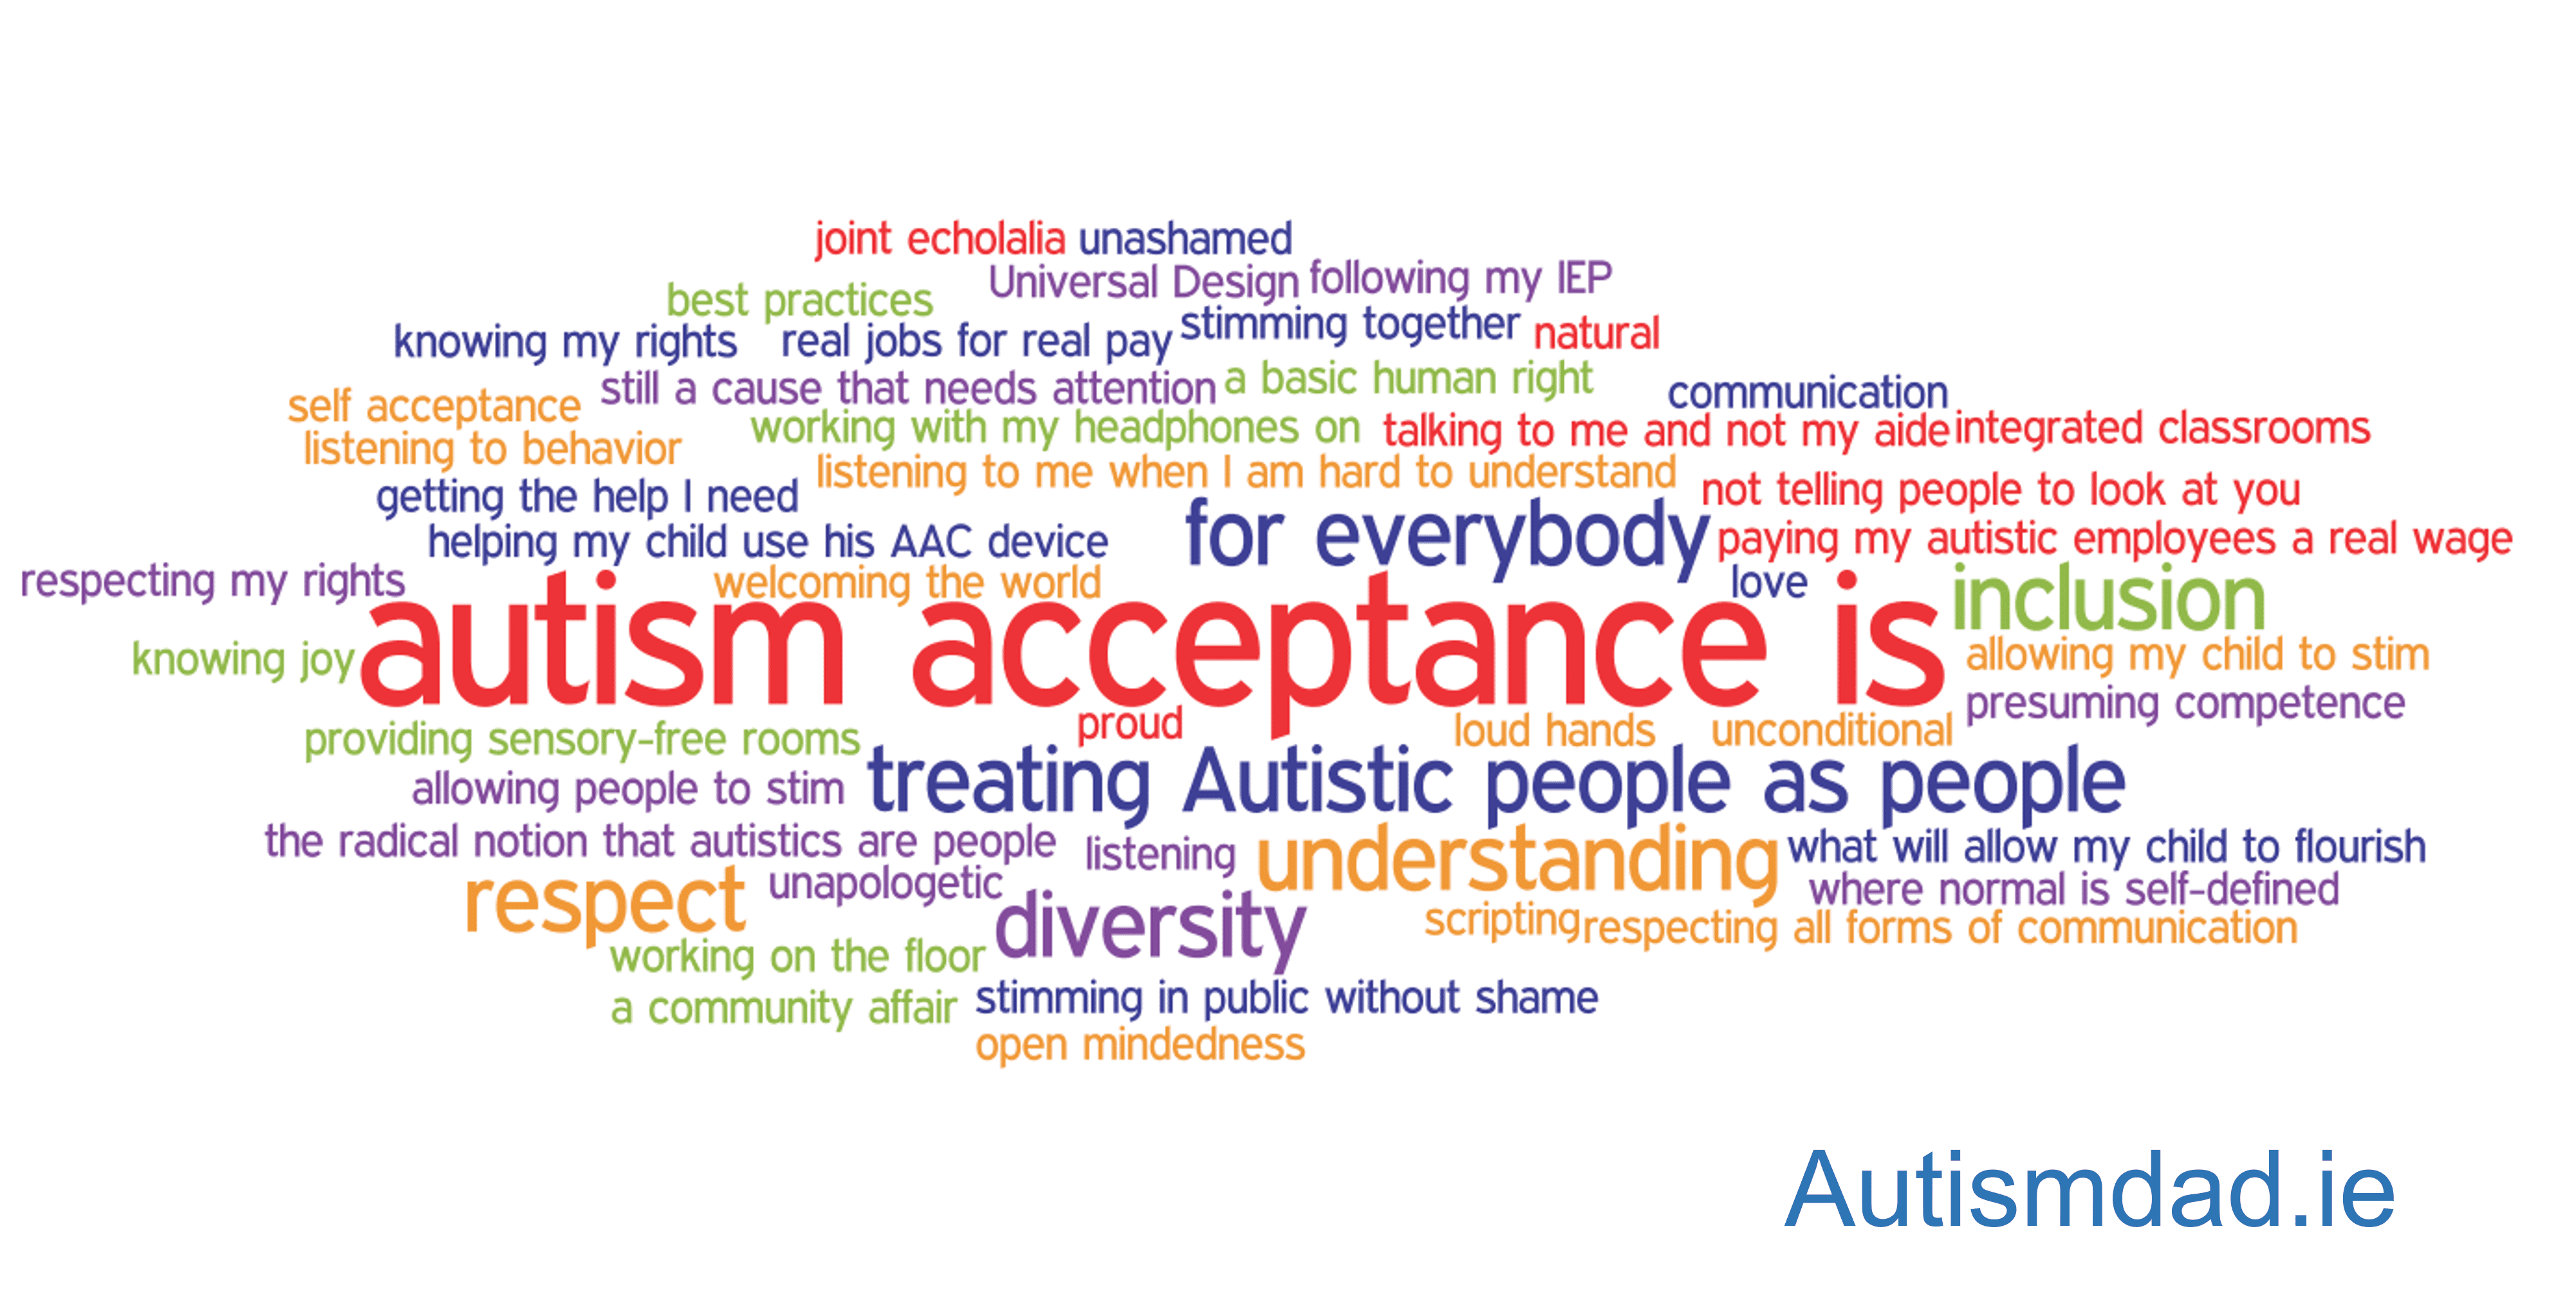 Education is key to Autism Acceptance